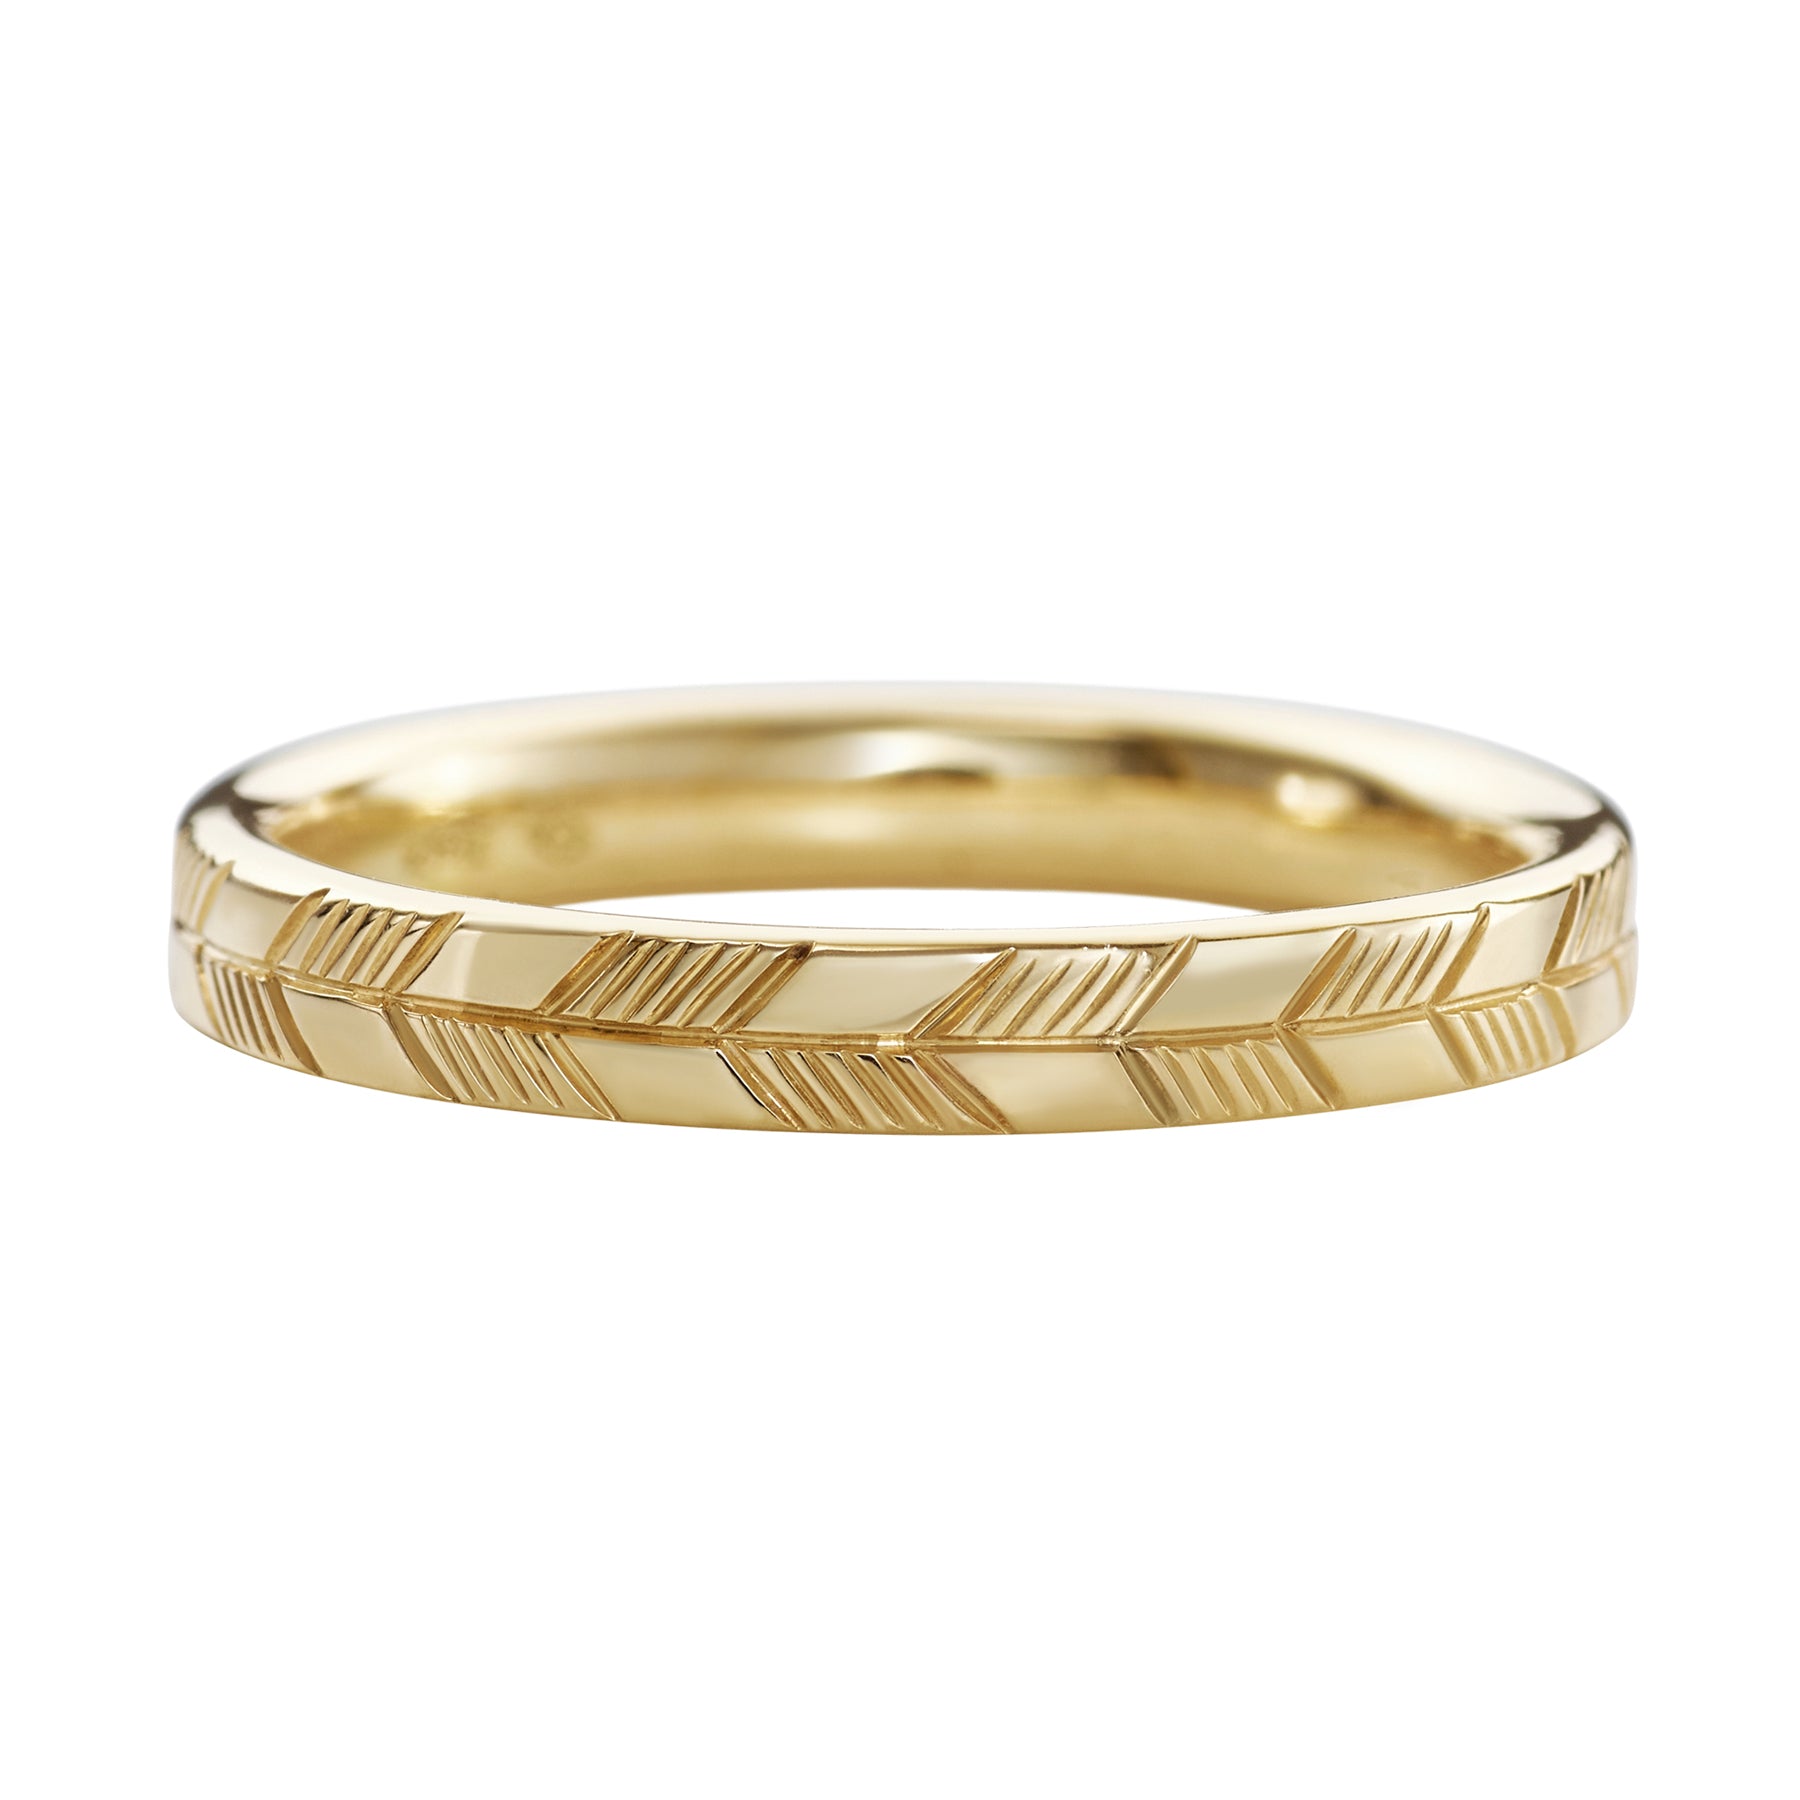    Golden-Wedding-Band-with-an-Abstract-Feather-Engraving-CLOSEUP